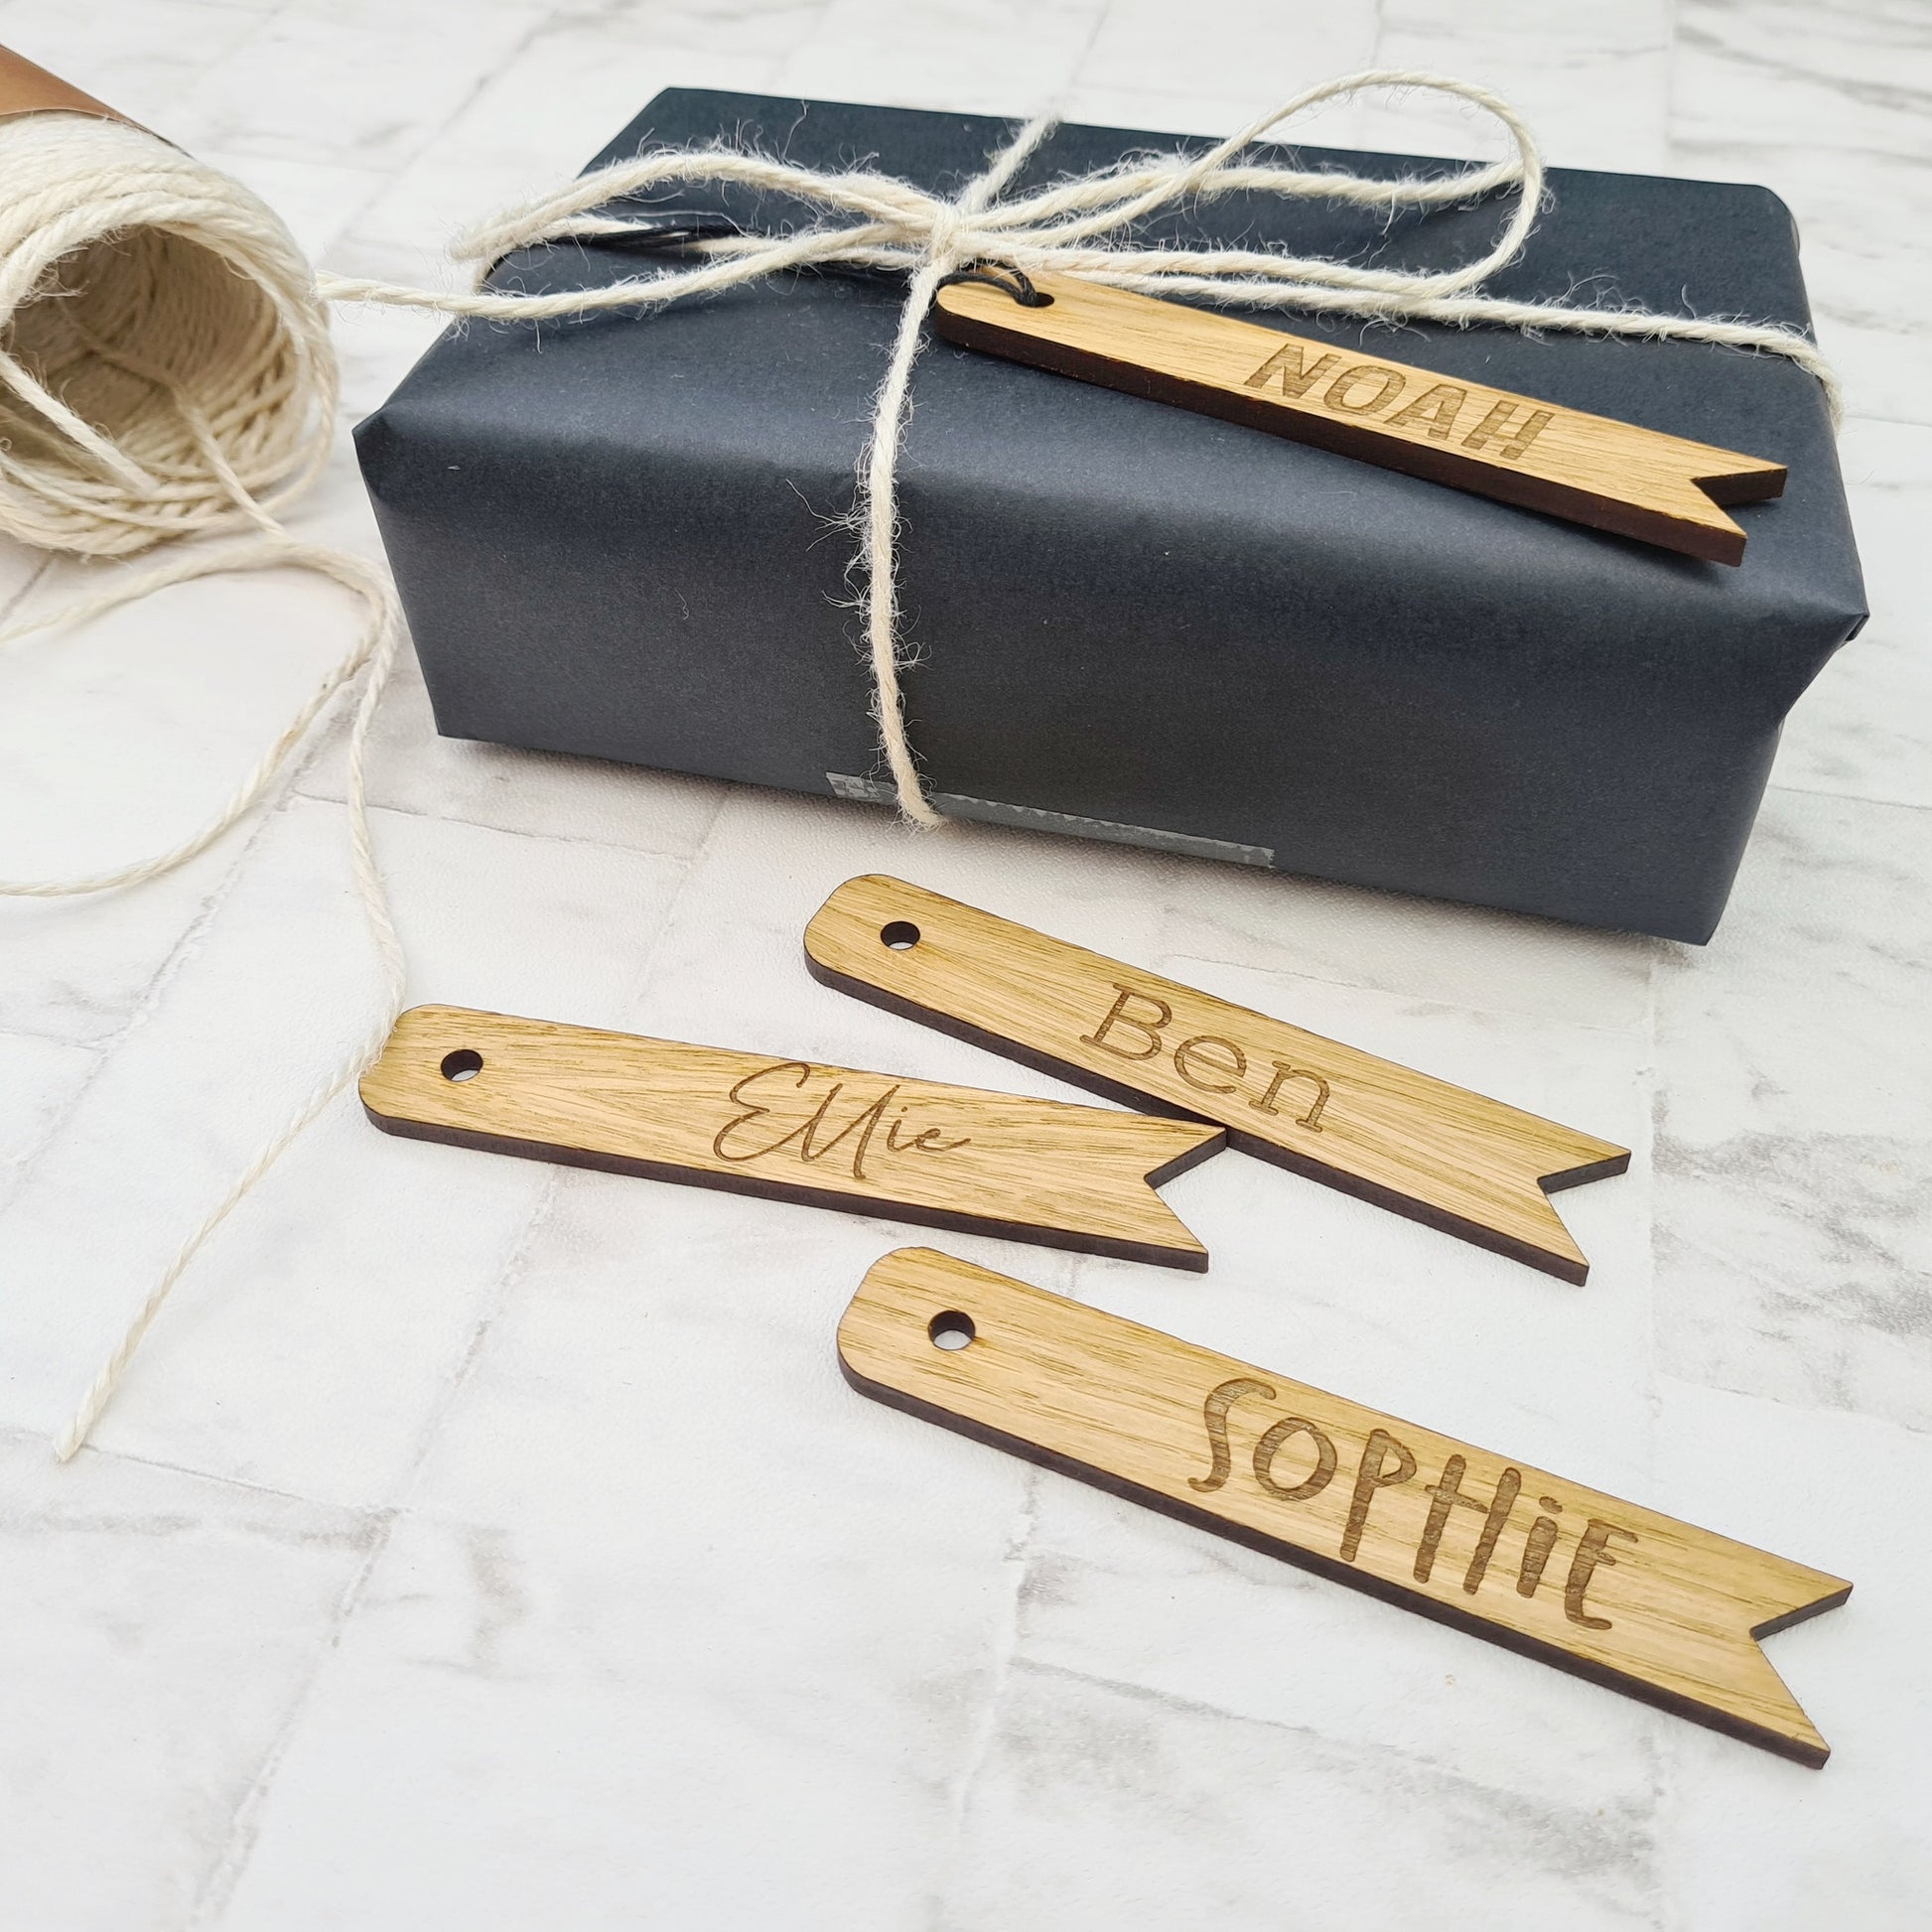 Personalised wooden gift tags, engraved with names attached to a black wrapped parcel tied up with string 